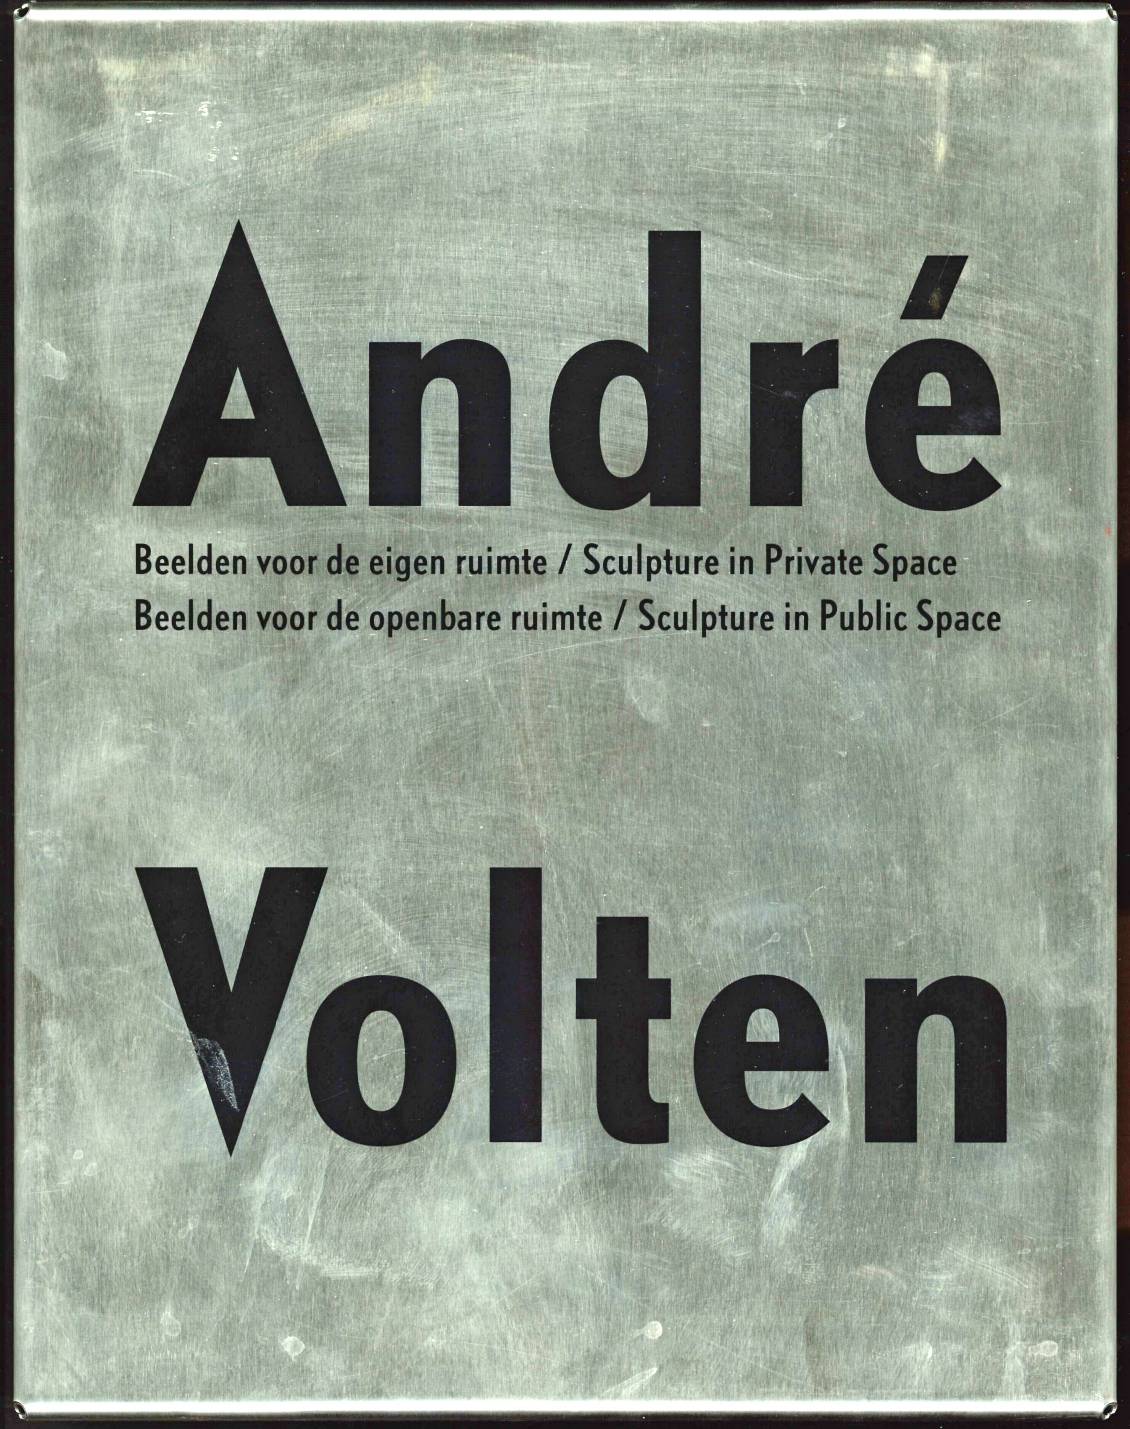 André Volten; Images for own space / Images for public space, 2000